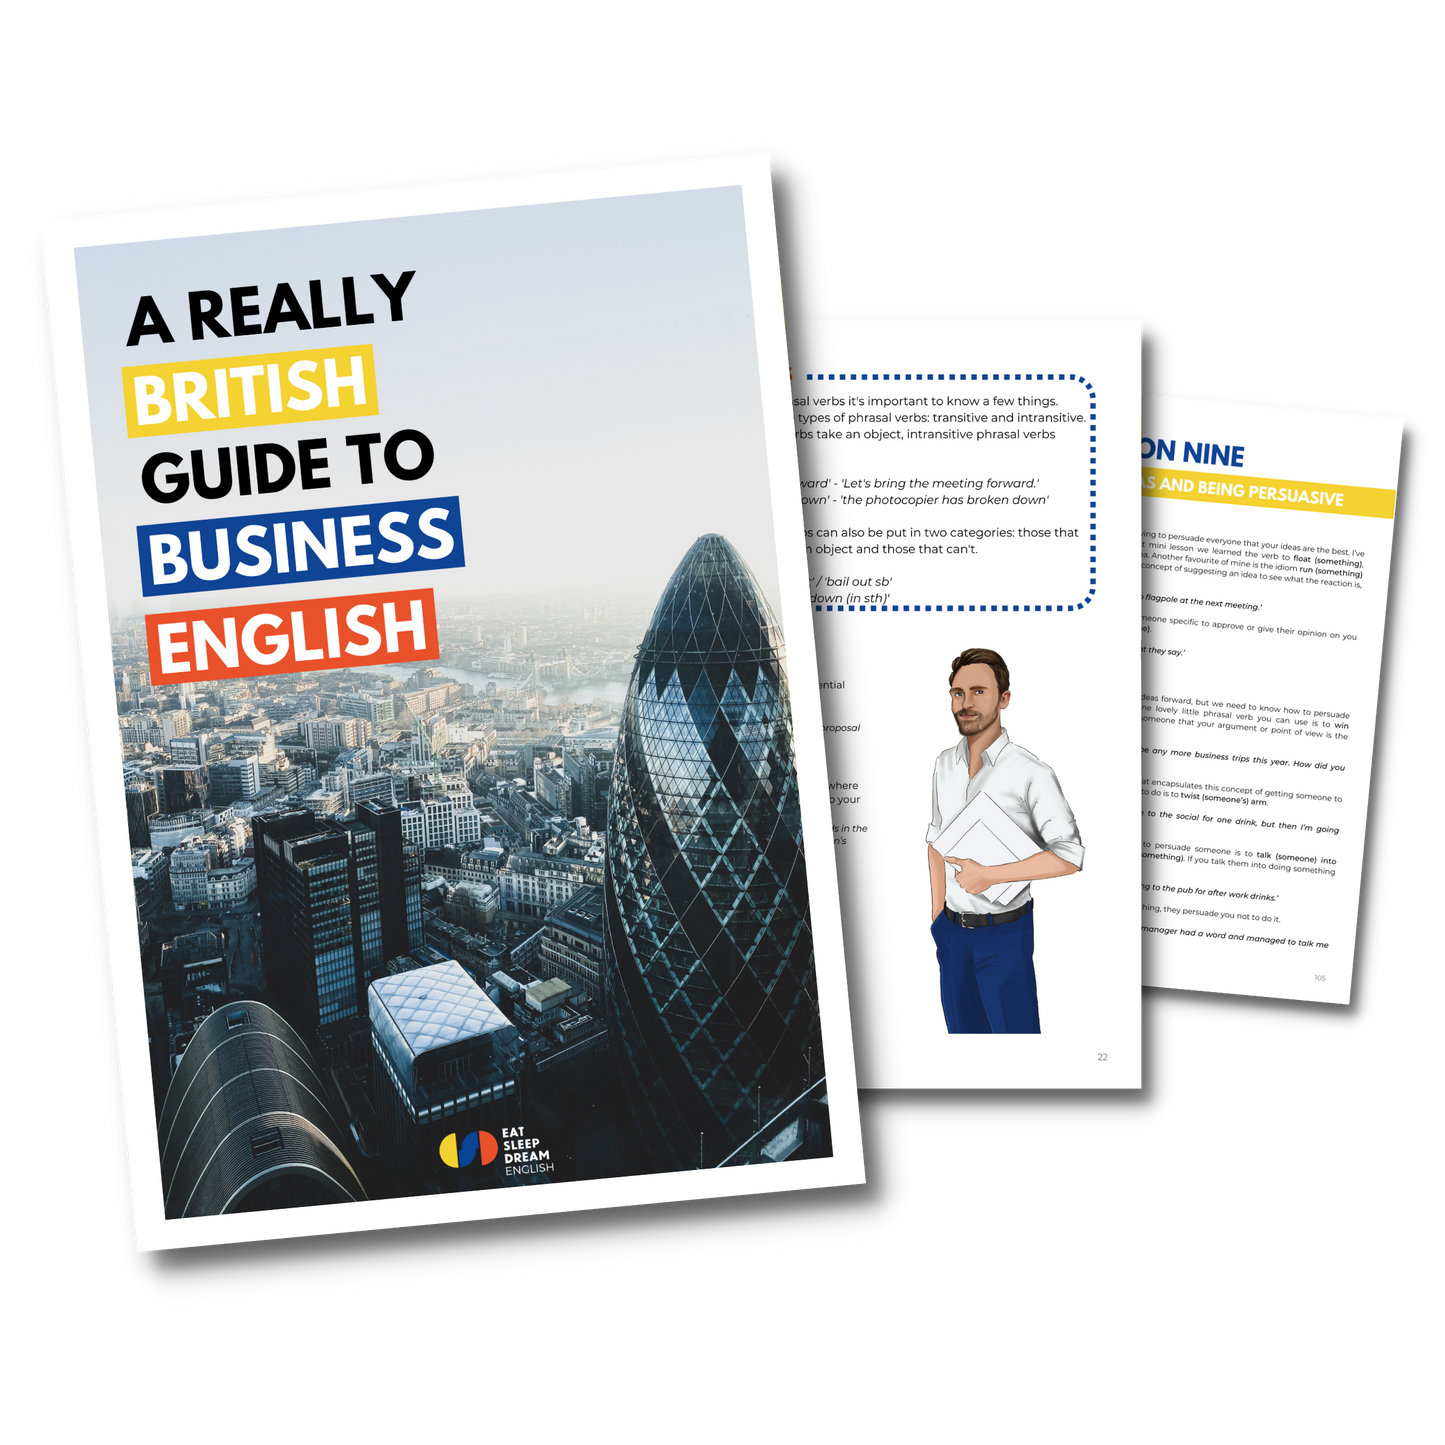 A Really British Guide to Business English - Digital Book